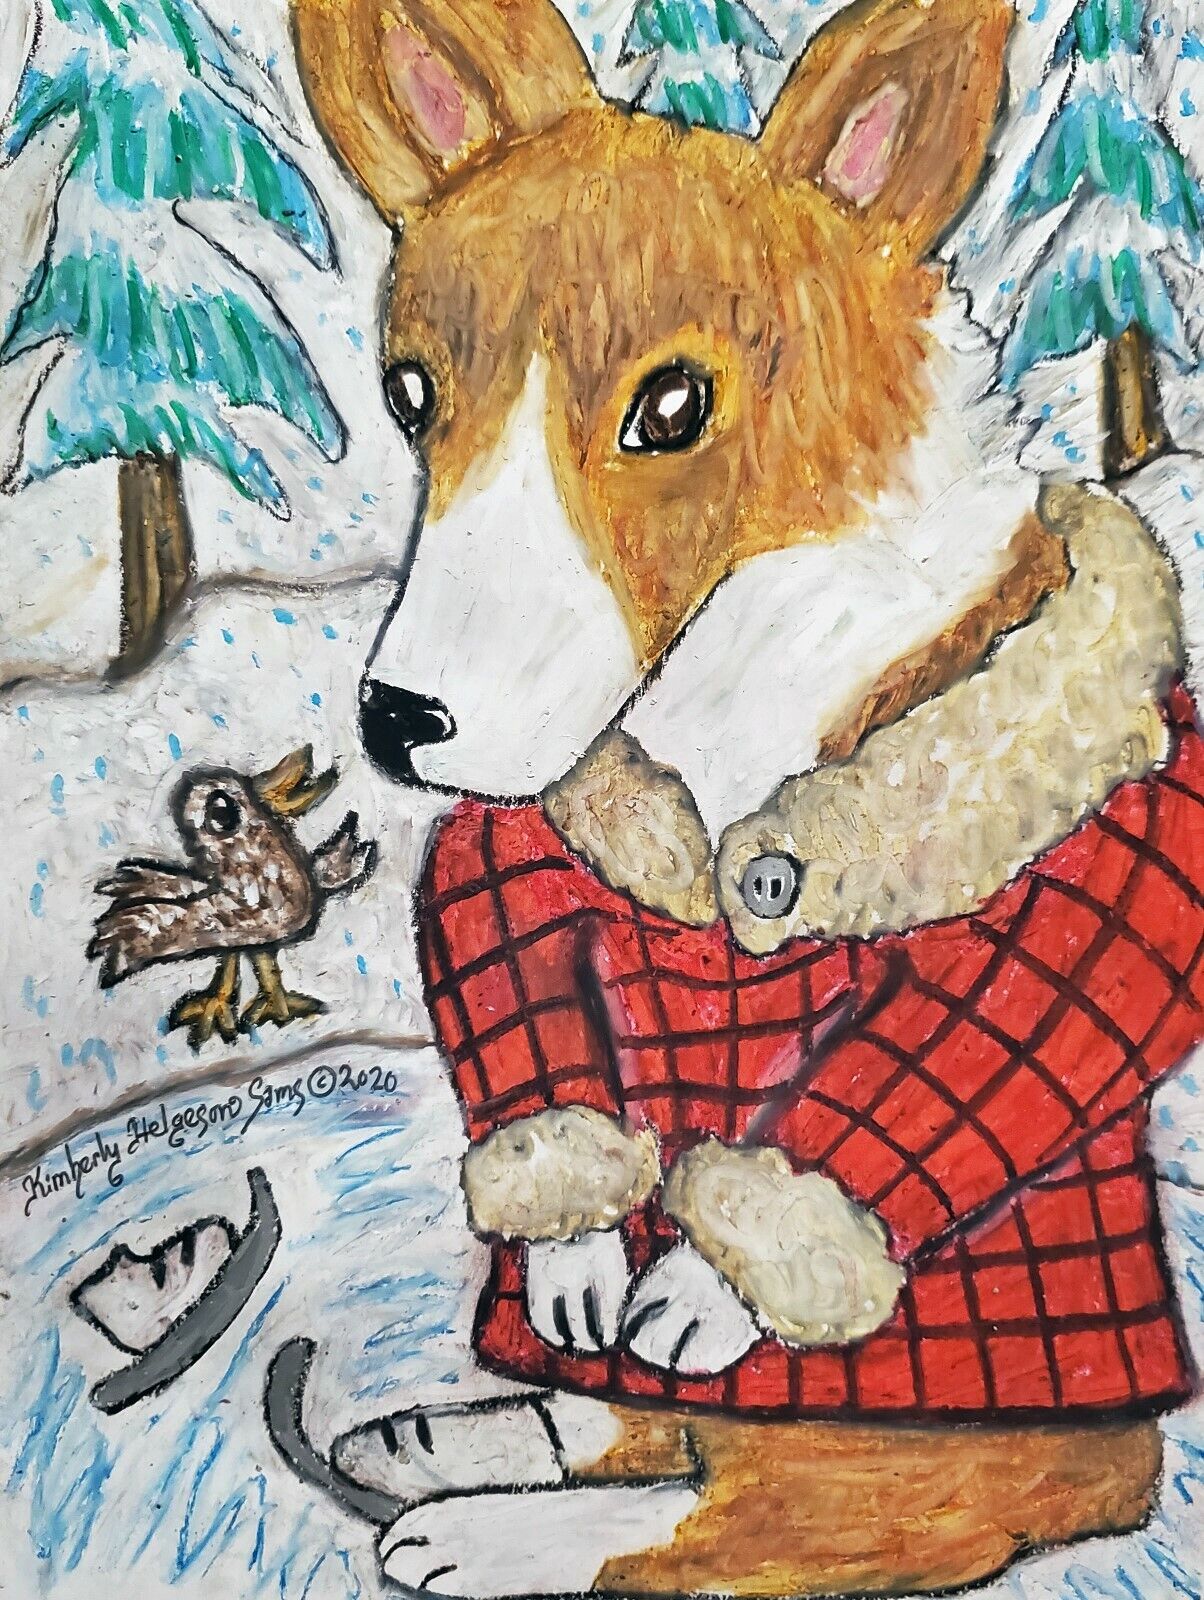 Corgi Learning to Ice Skate Original Painting 9x12 Vintage Style Art Collectible